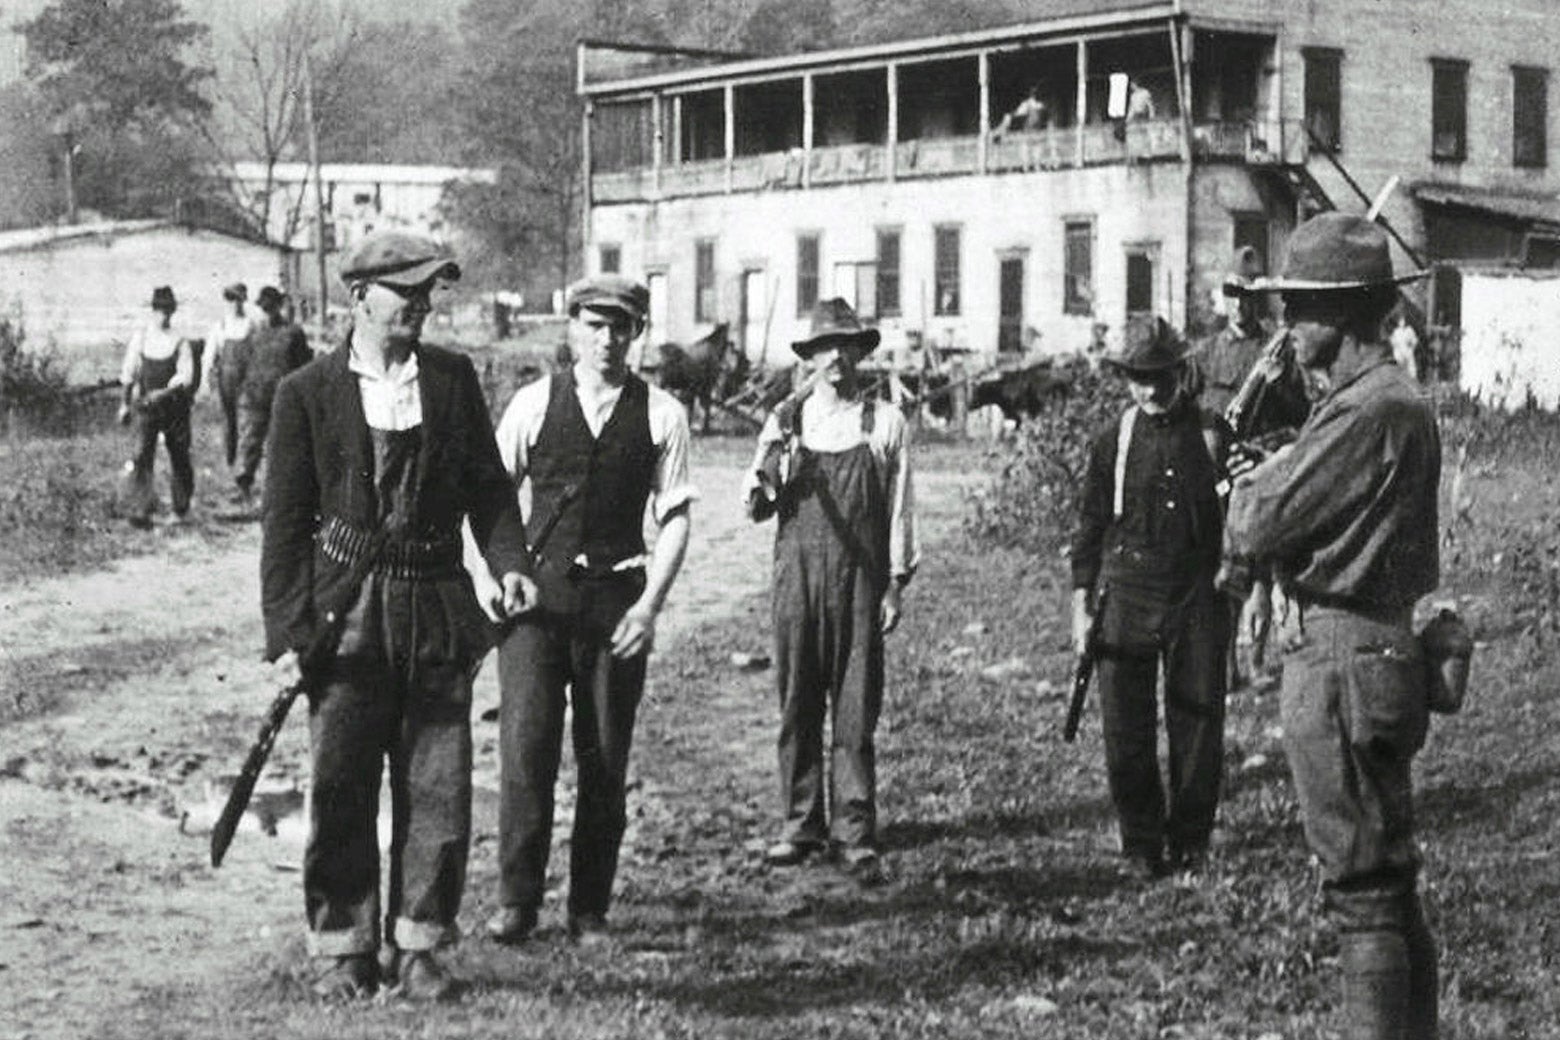 Coal miners and federal troops with weapons stand outside a building.